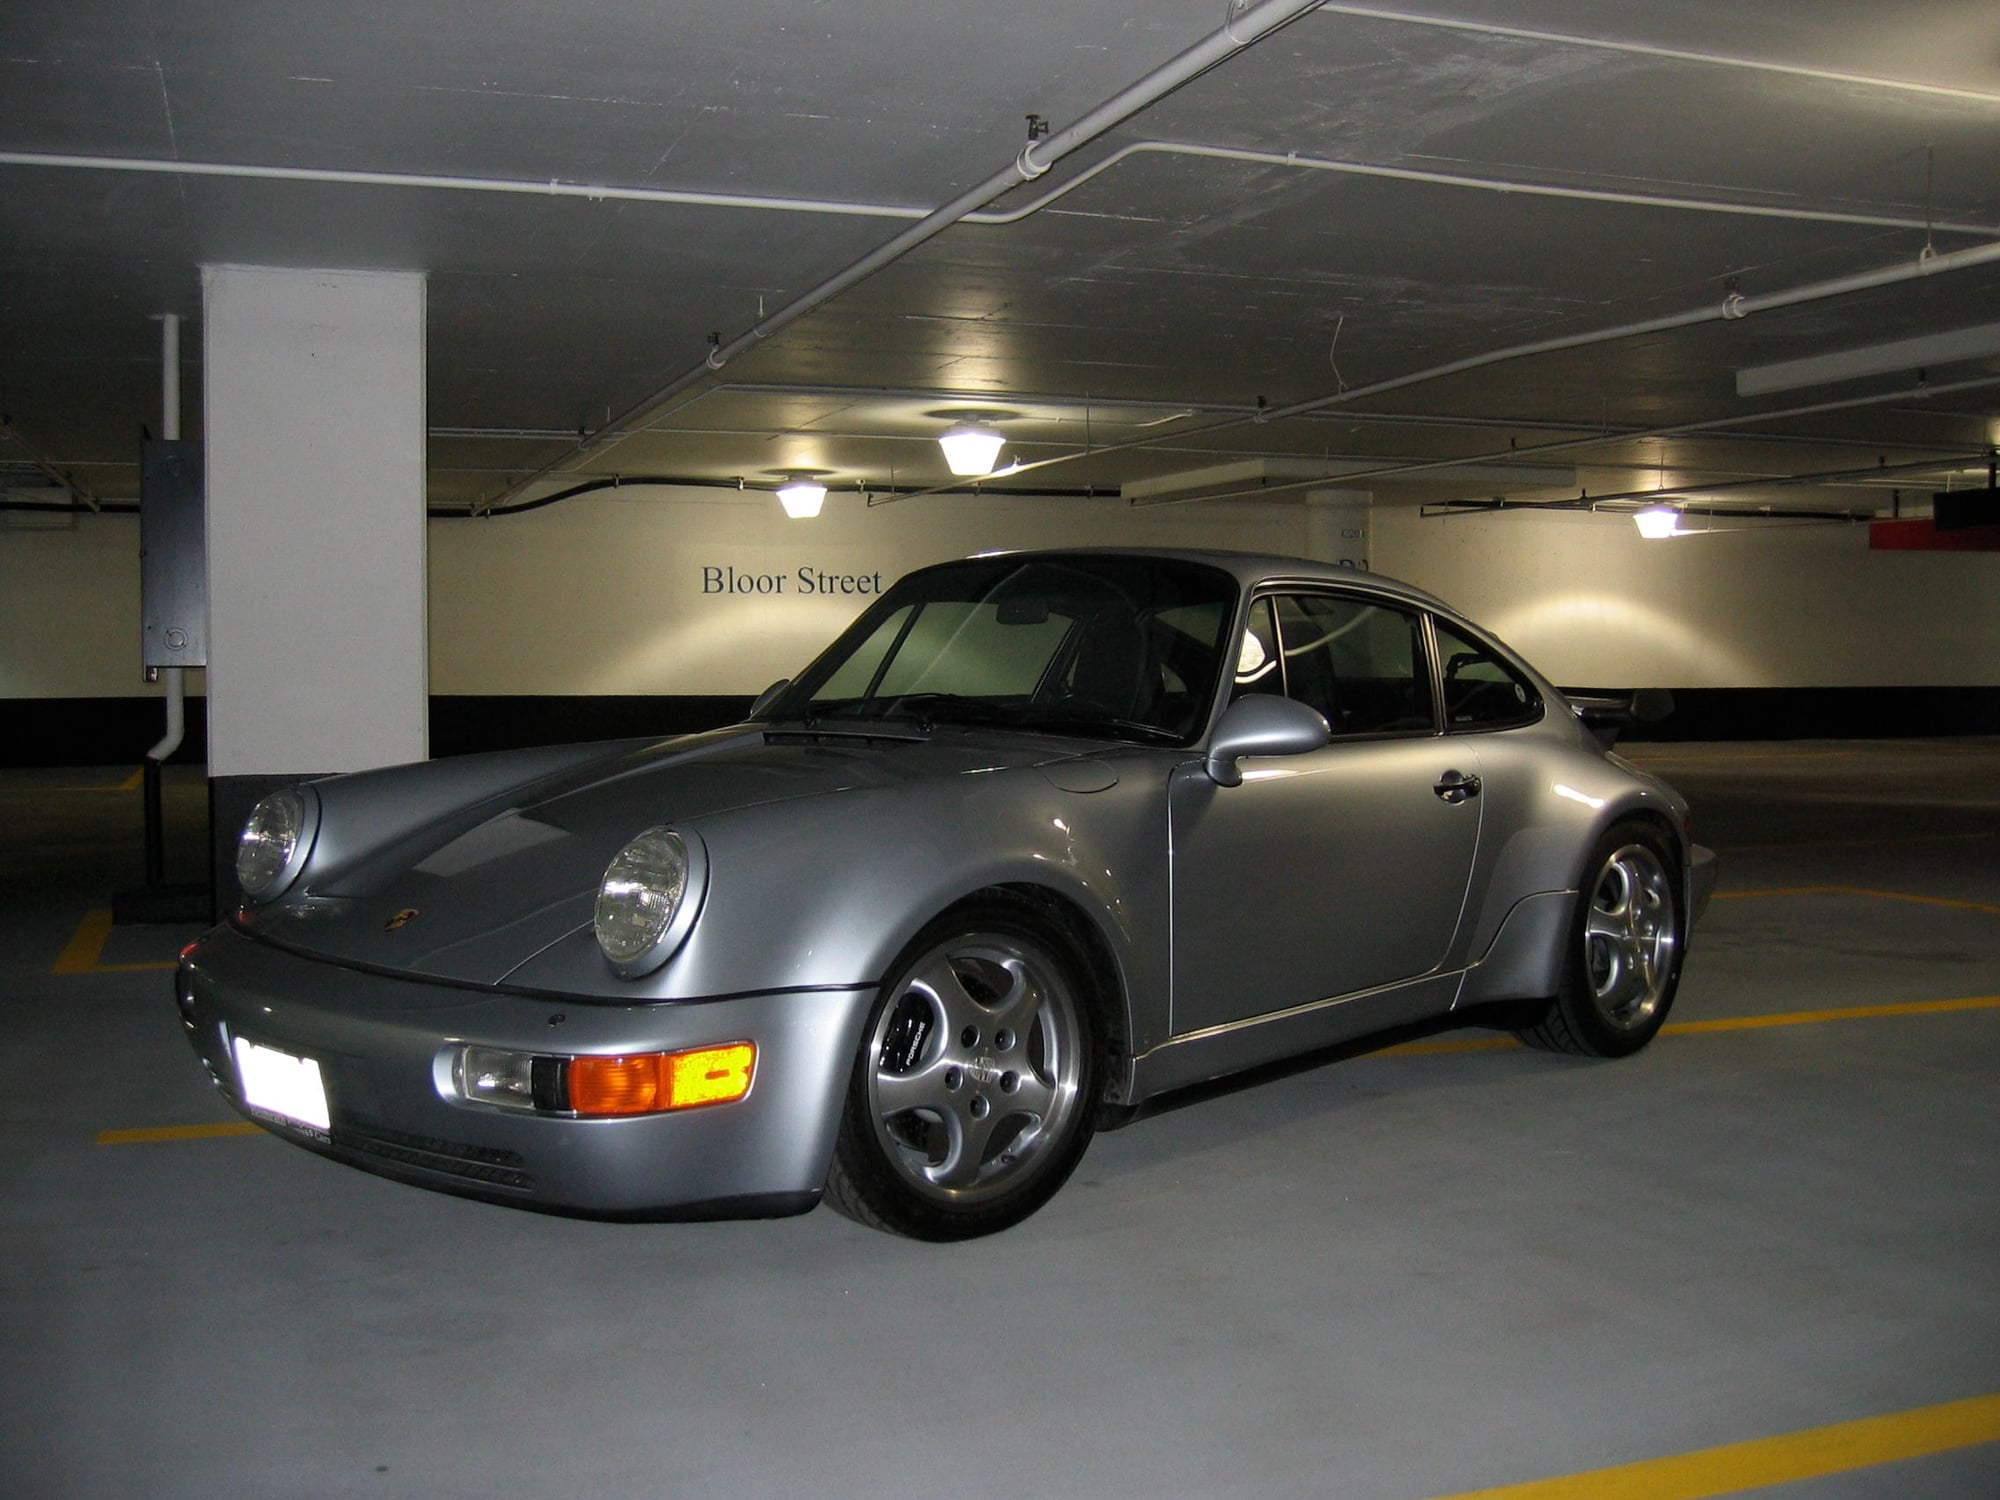 1991 Porsche 911 - 1991 911 Turbo for sale - Used - VIN WP0AA2962MS480332 - 53,000 Miles - 6 cyl - 2WD - Manual - Coupe - Silver - Toronto, ON M1M1J9, Canada